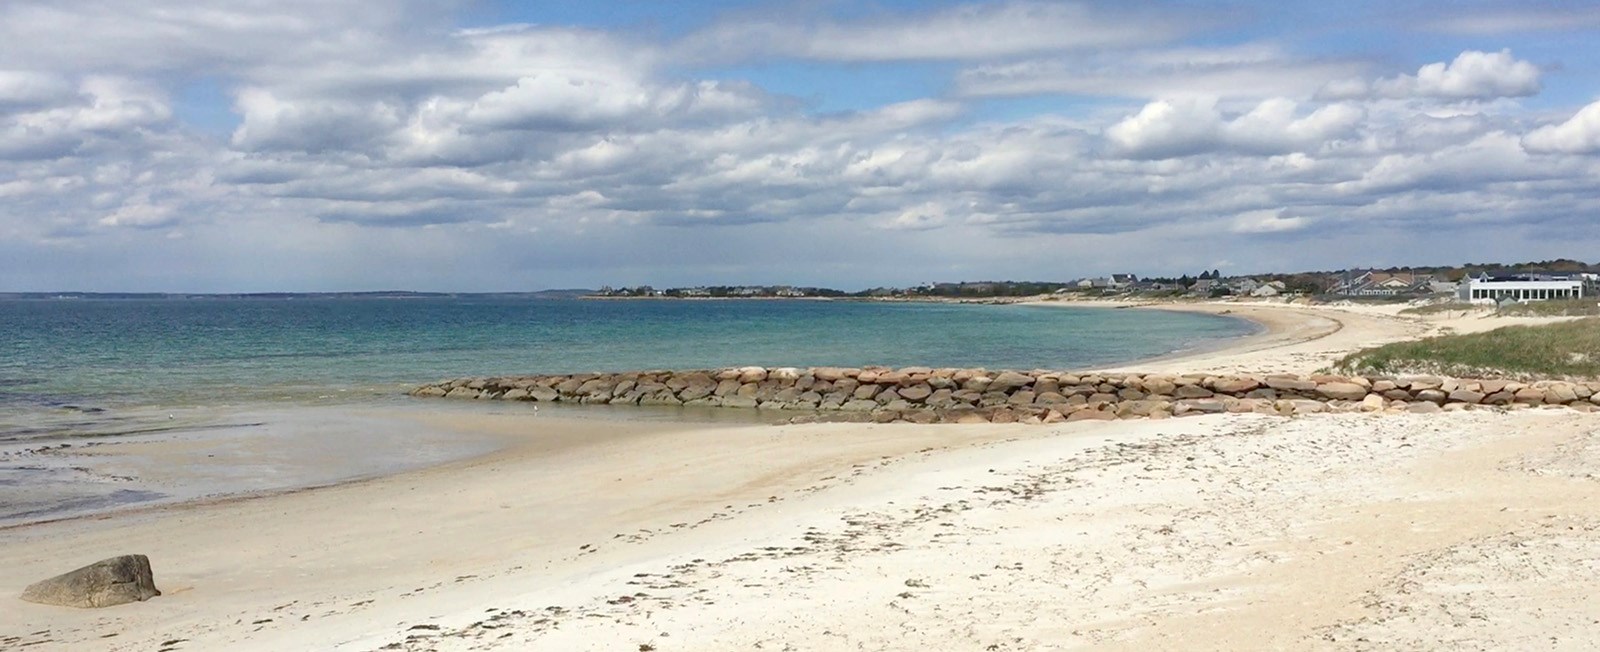 You'll love the beaches of Falmouth with their warm waters and tide pools waiting for exploration!